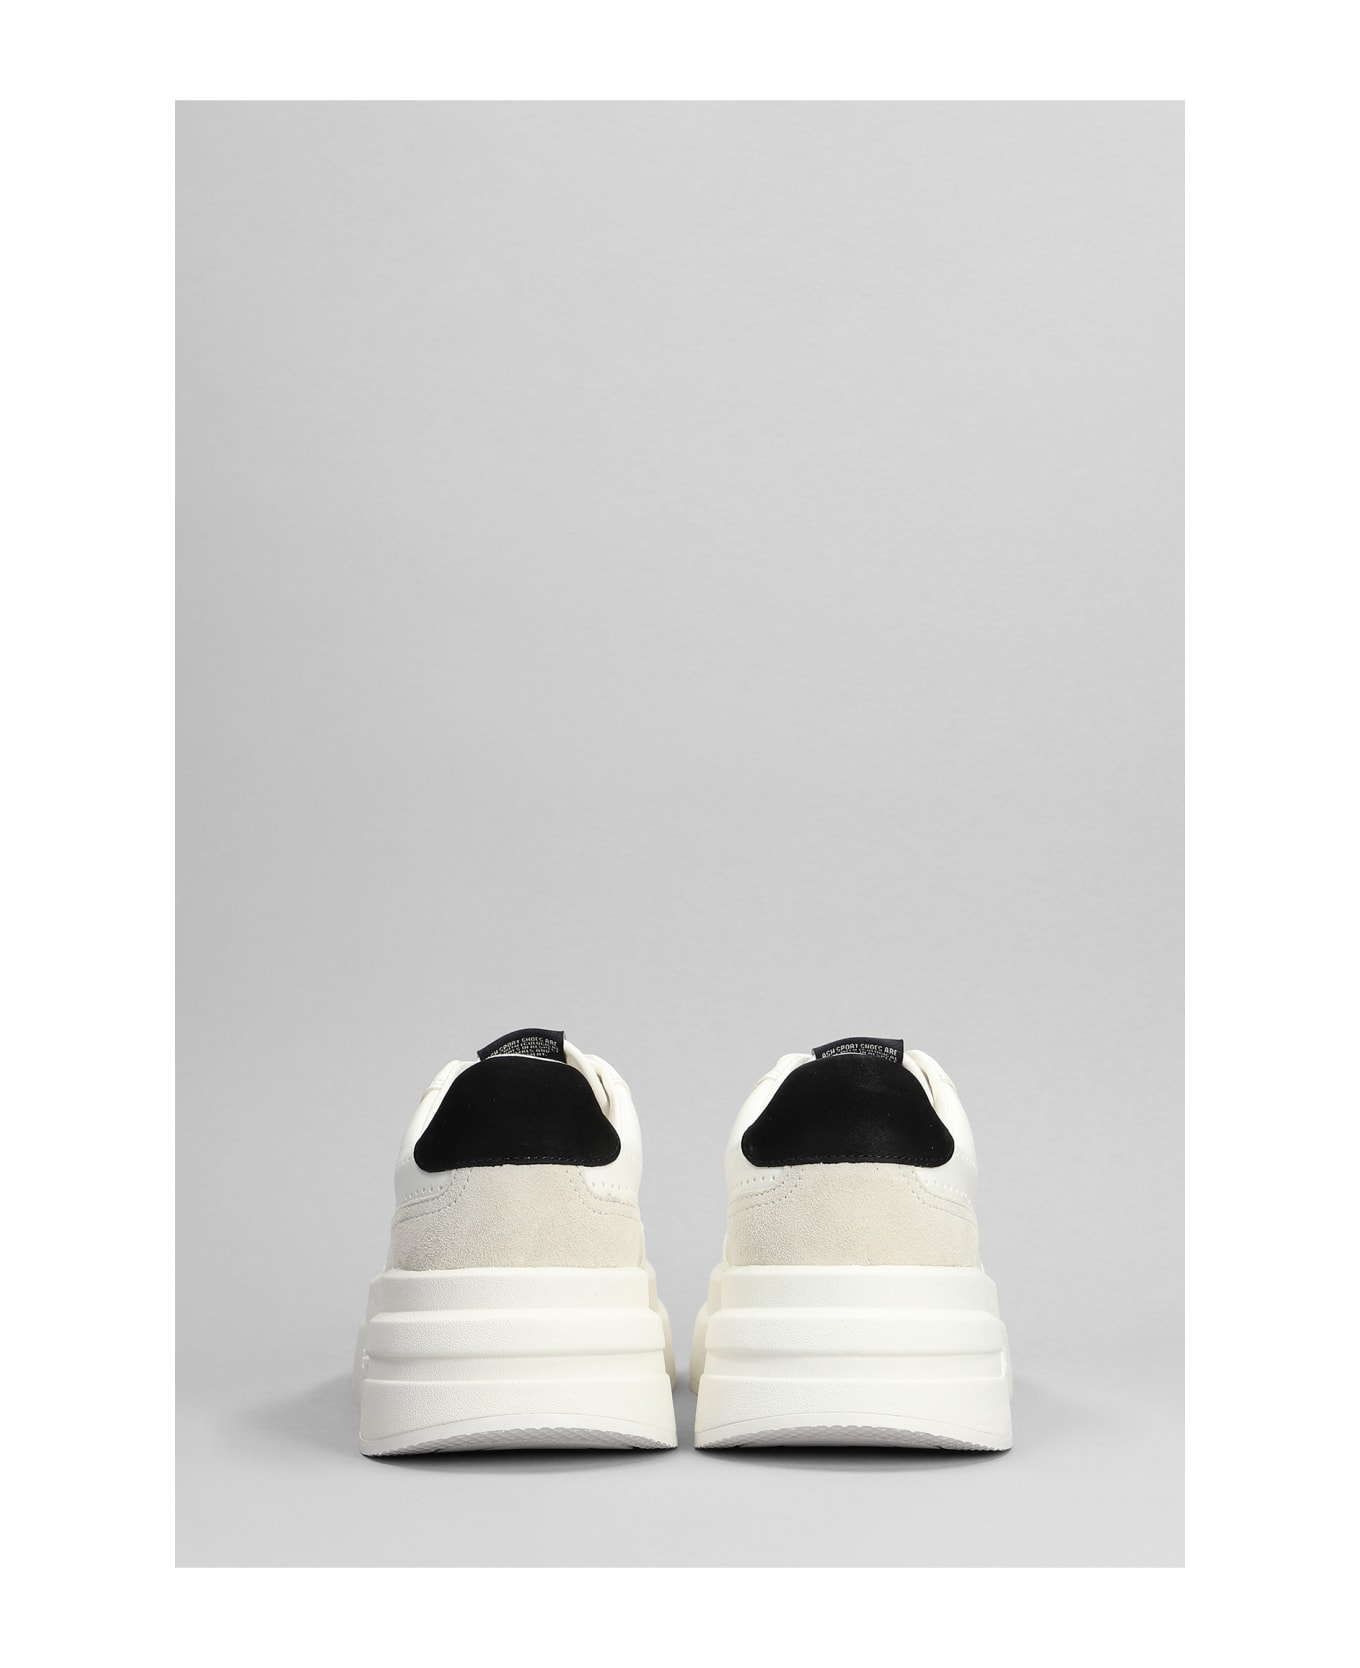 Ash Impuls Sneakers In White Leather - white